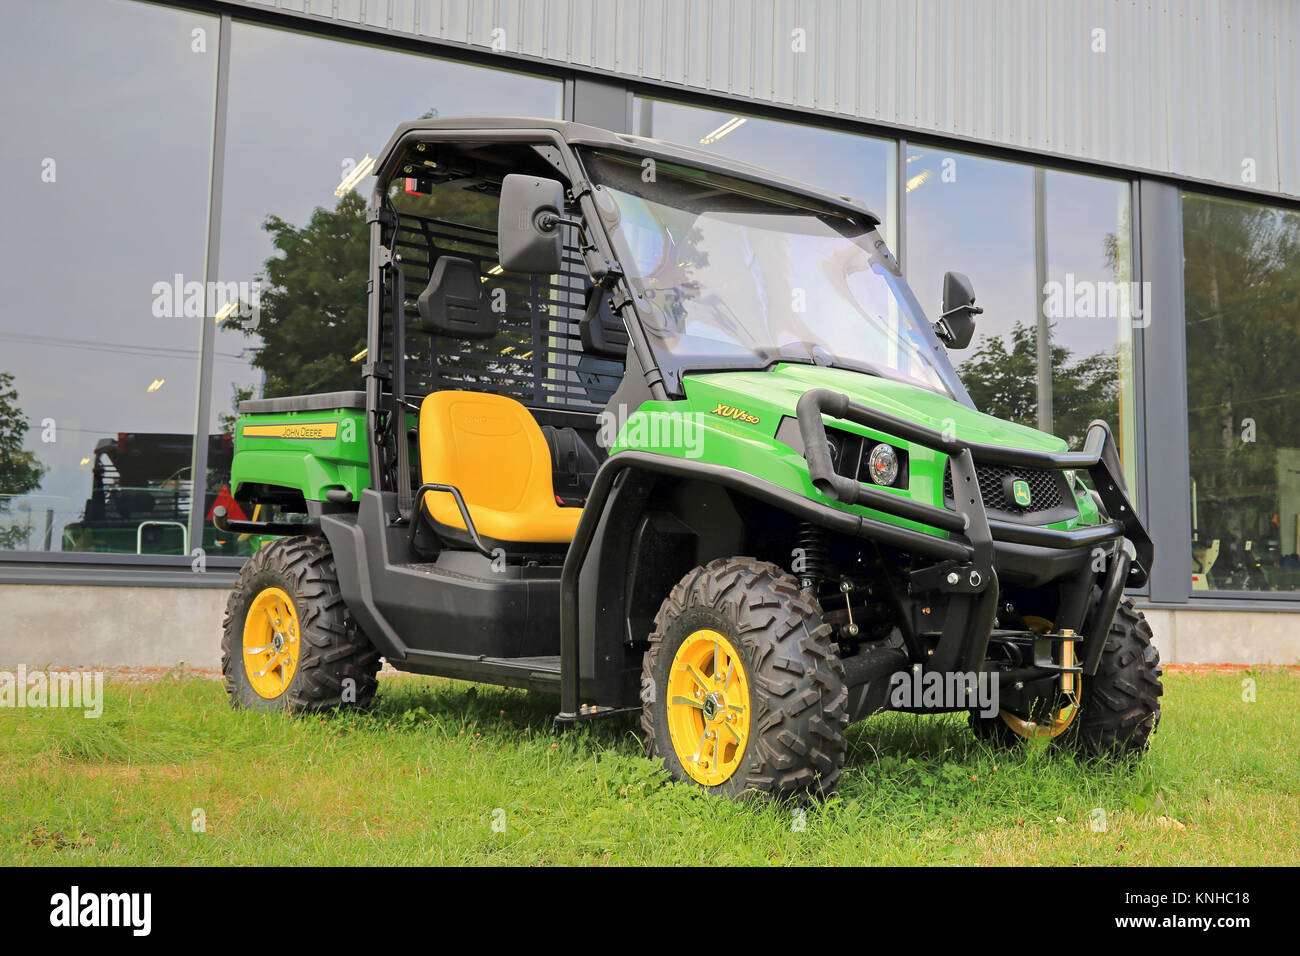 SALO, FINLAND - AUGUST 9, 2014: John Deere Gator XUV550 Crossover Utility Vehicle on grass. The Gator has a V-twin engine and independent four-wheel s Stock Photo